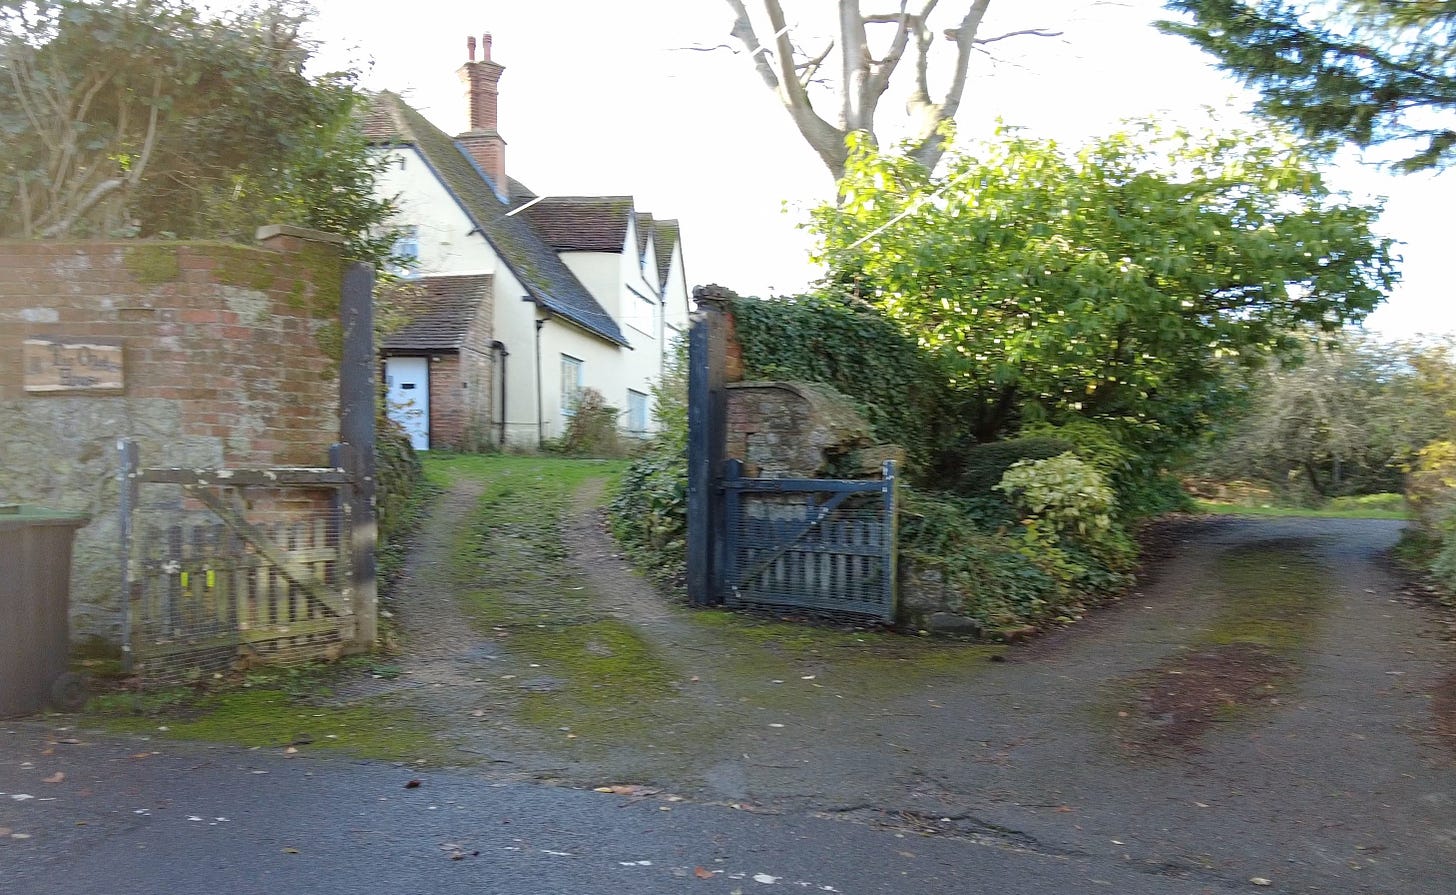 The Old House in Market Lavington, and it is the oldest house in the village.